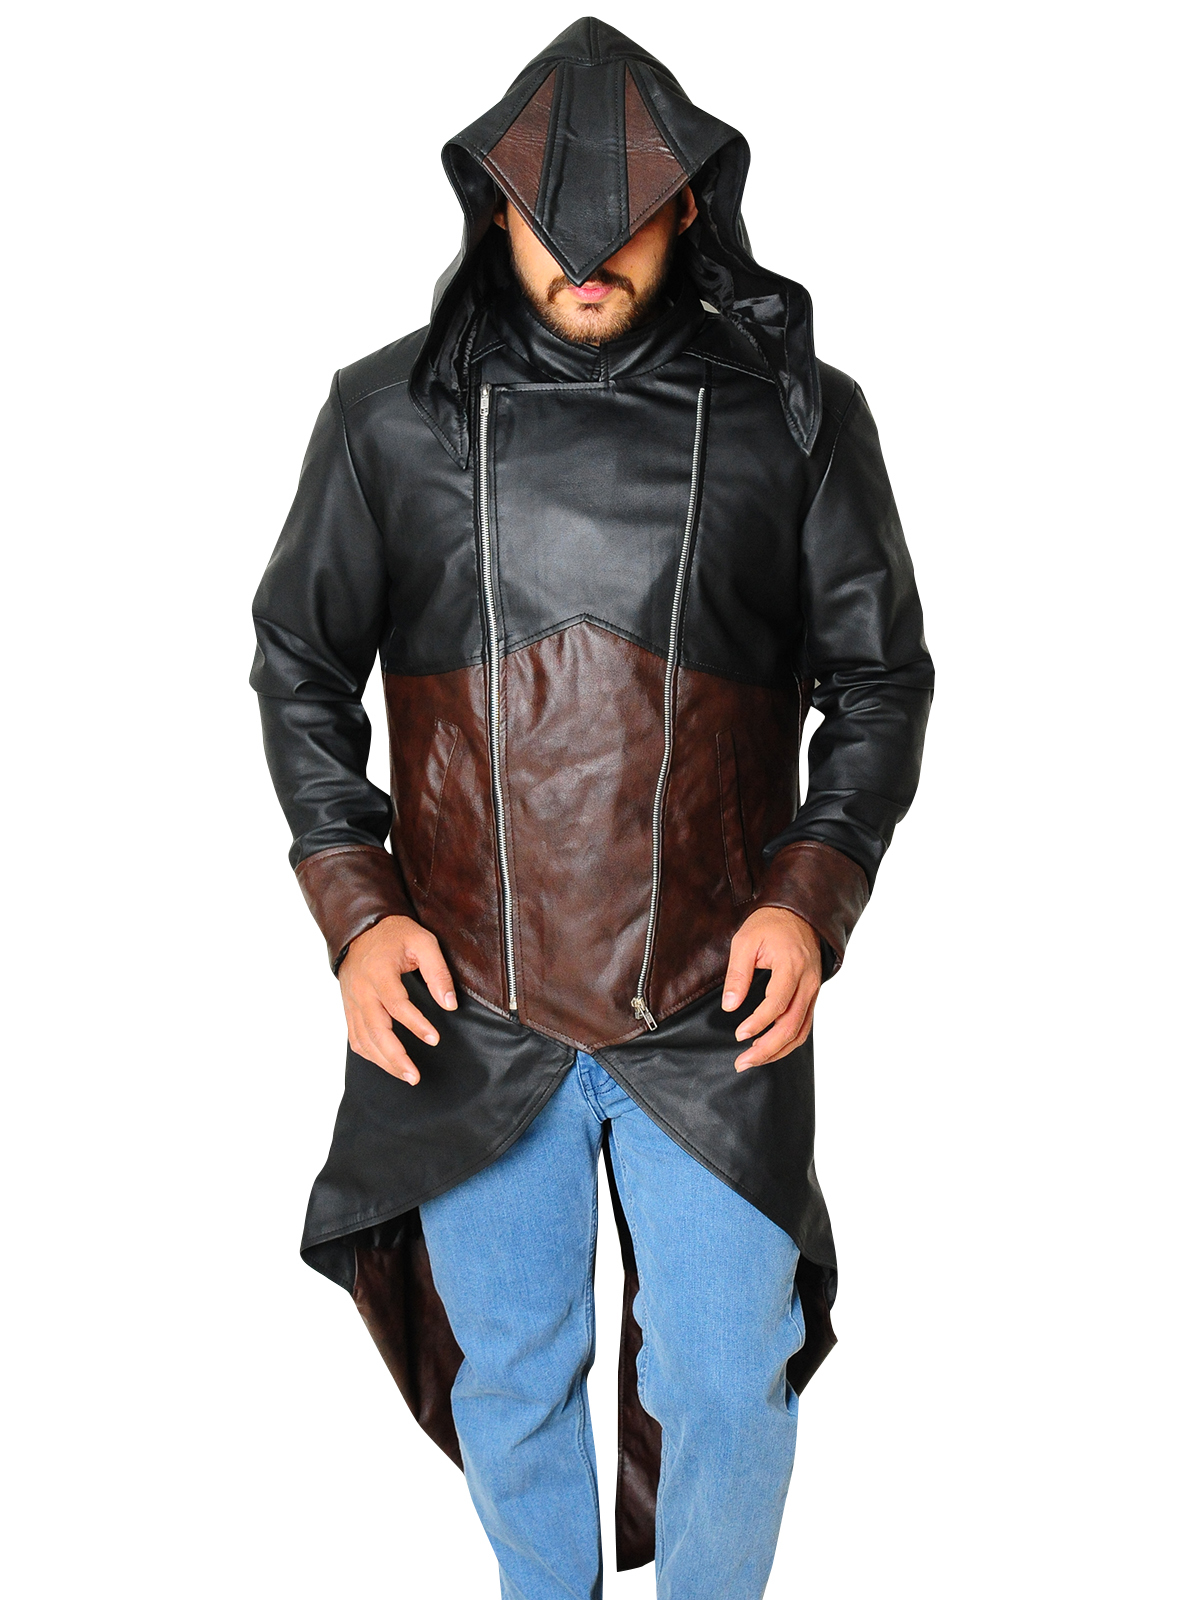 EXOTICA ASSASSINS CREED UNITY LEATHER HOODIE - ALL SIZES AVAILABLE - $129.99